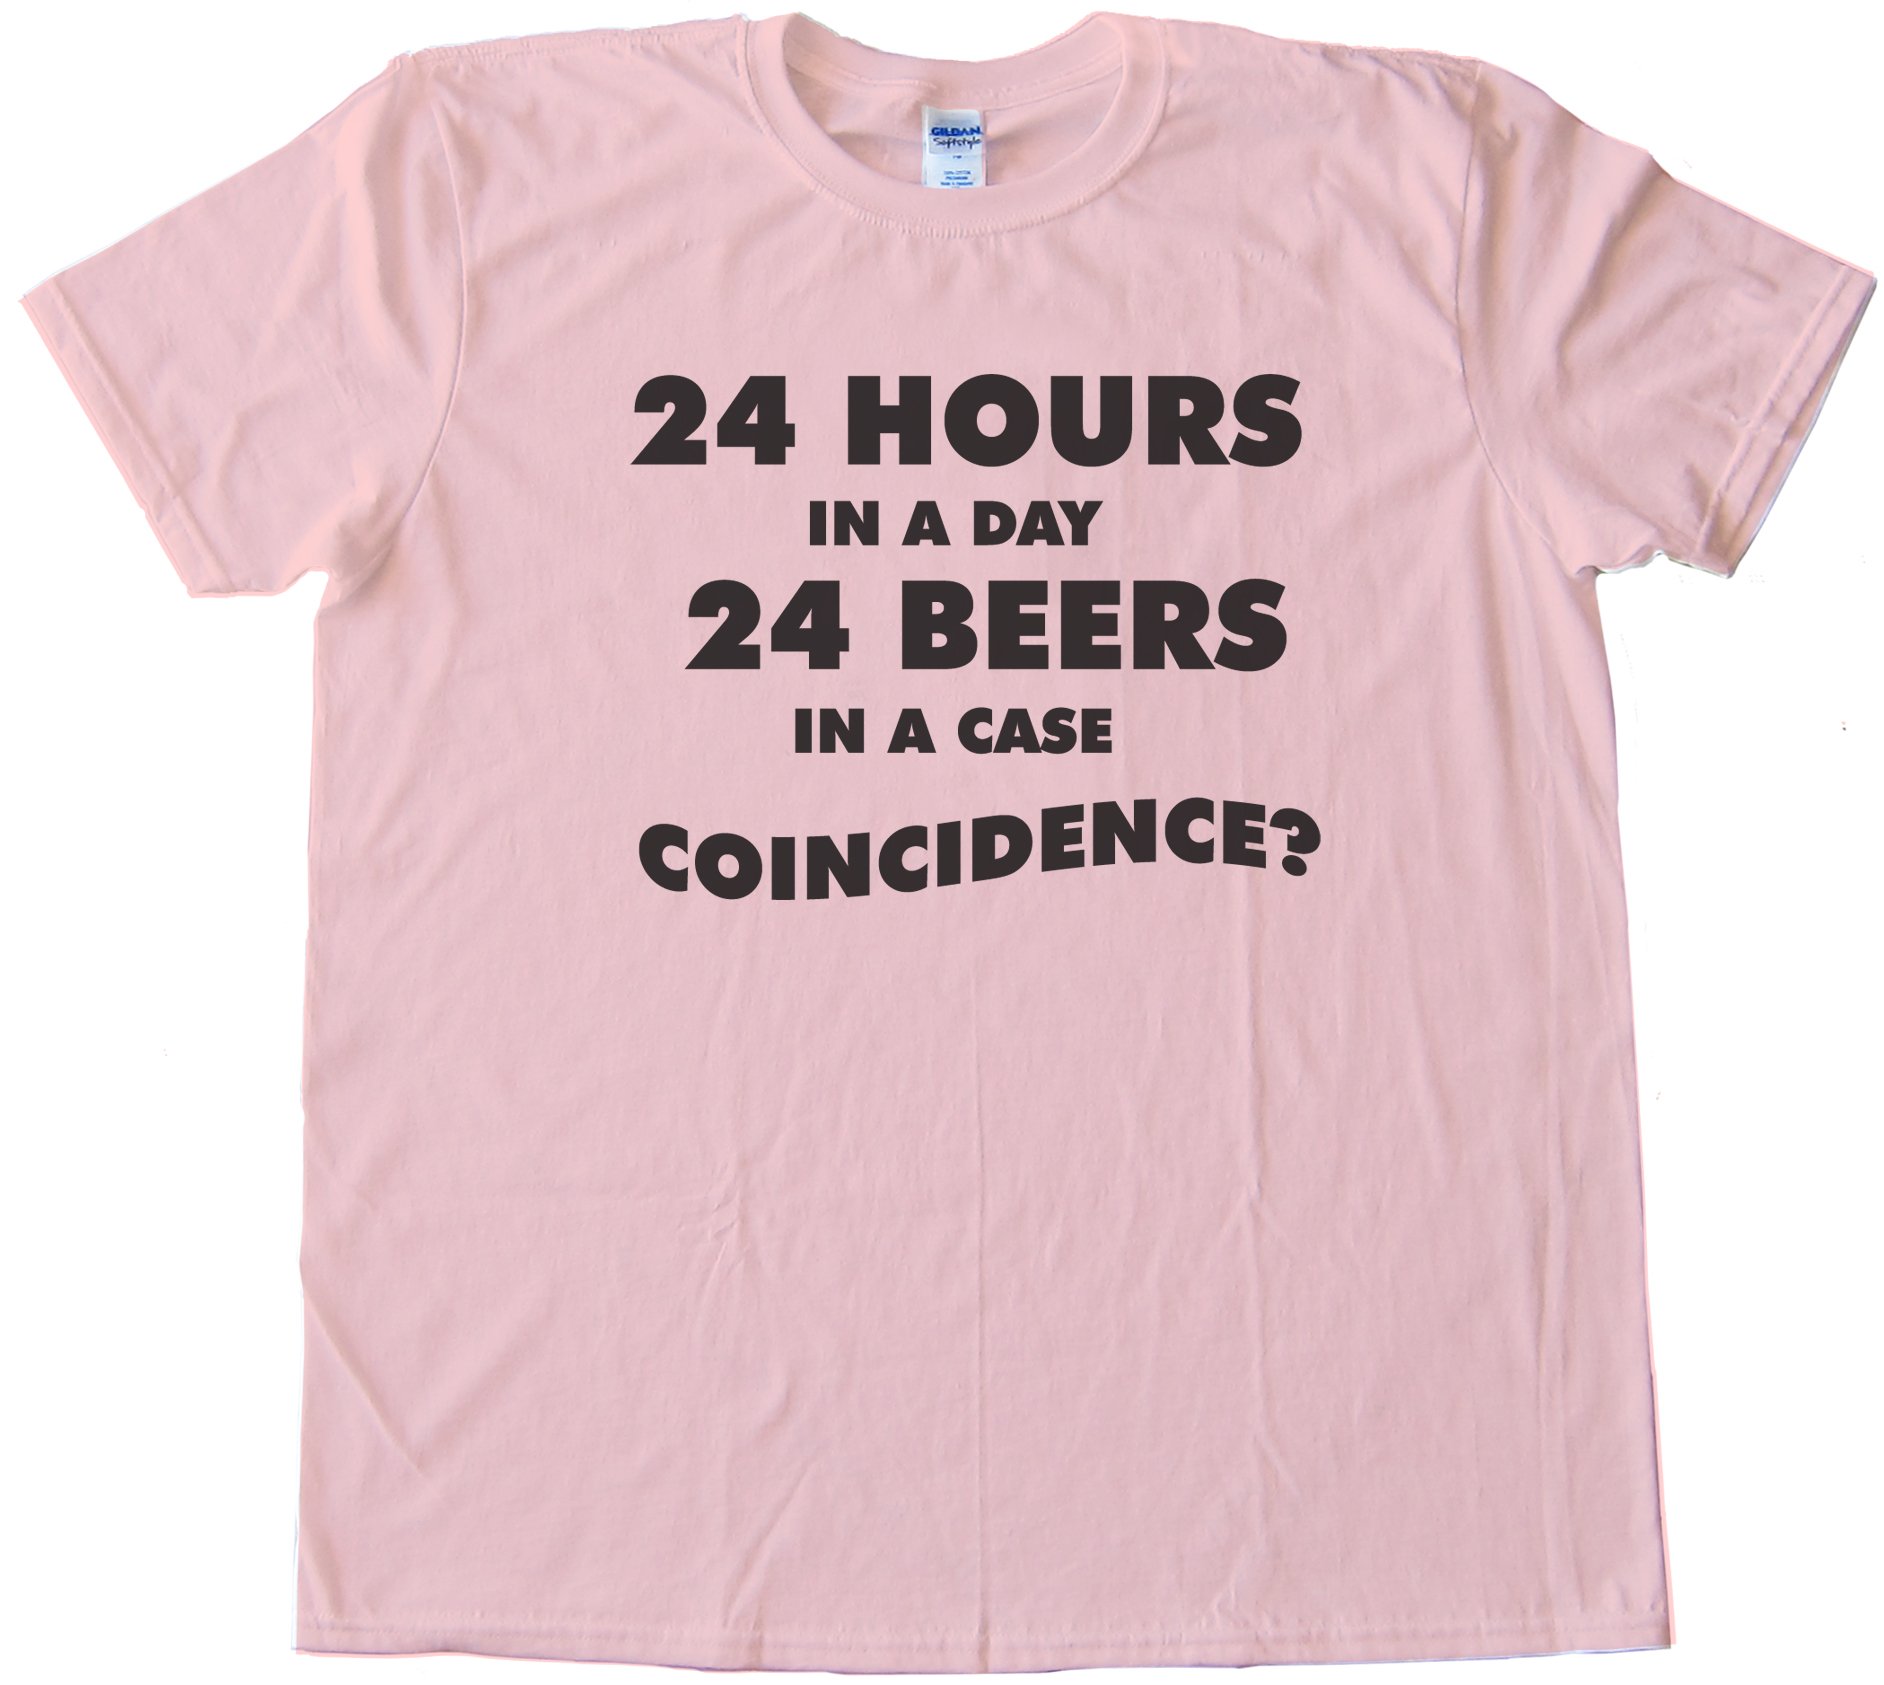 24 Hours In A Day 24 Beers In A Case - Coincidence? - Tee Shirt